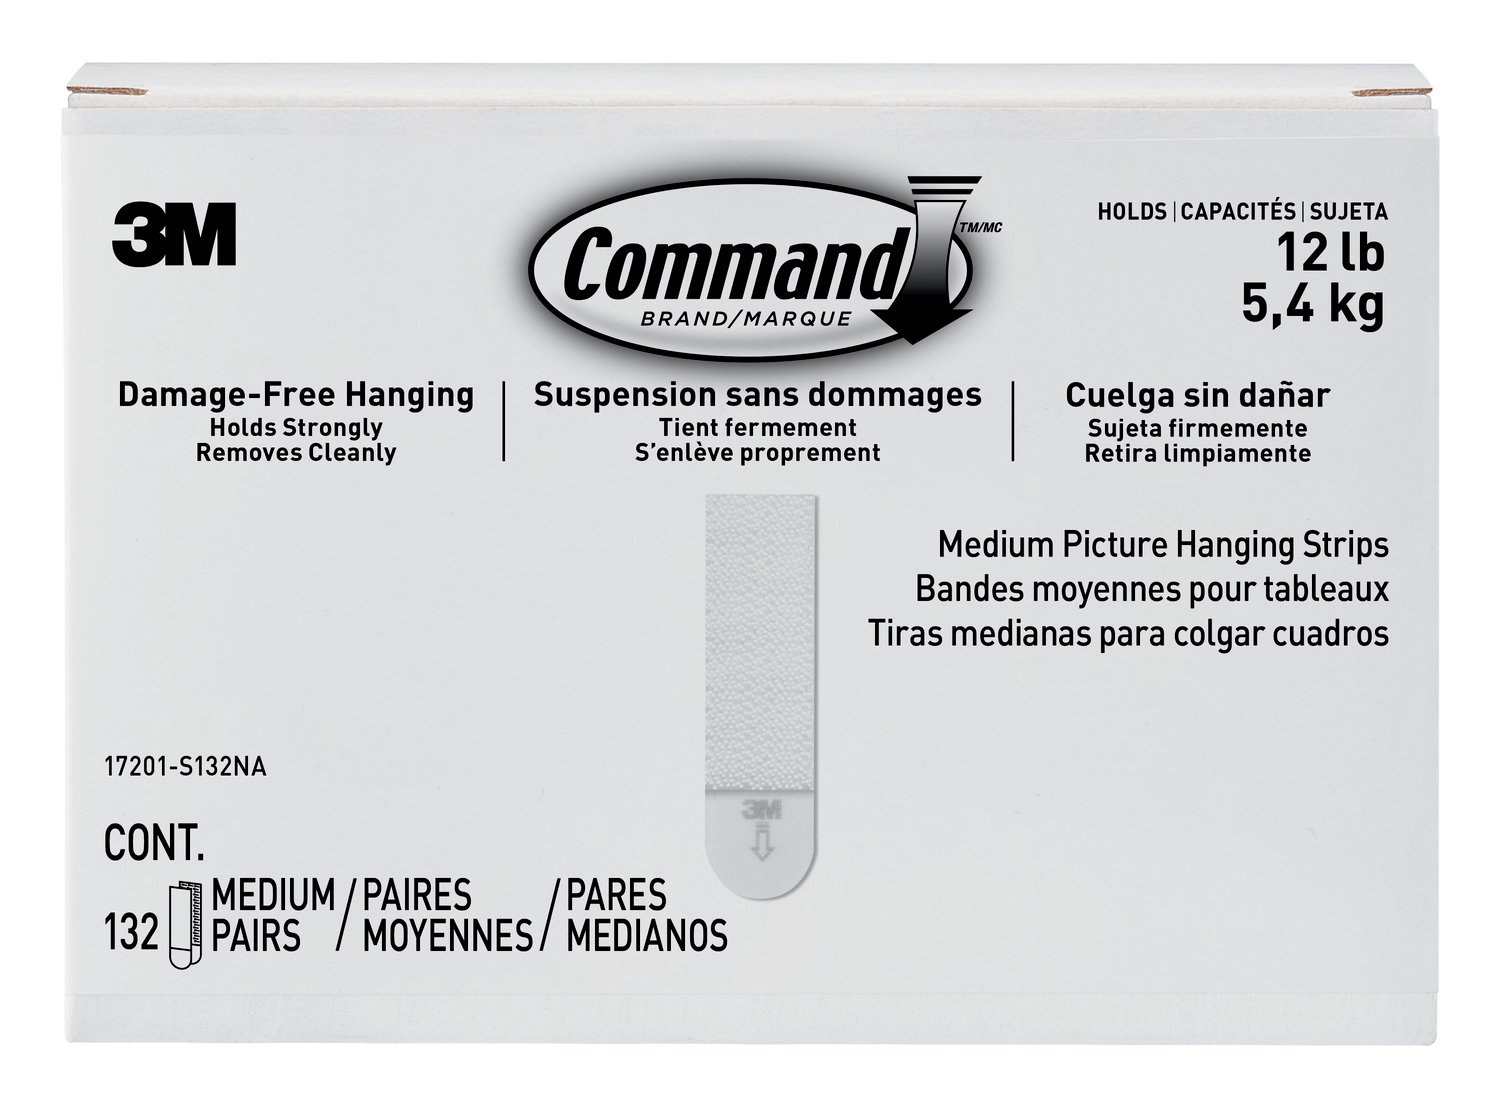 7100205660 - Command Medium Picture Hanging Strips 17201-S132NA